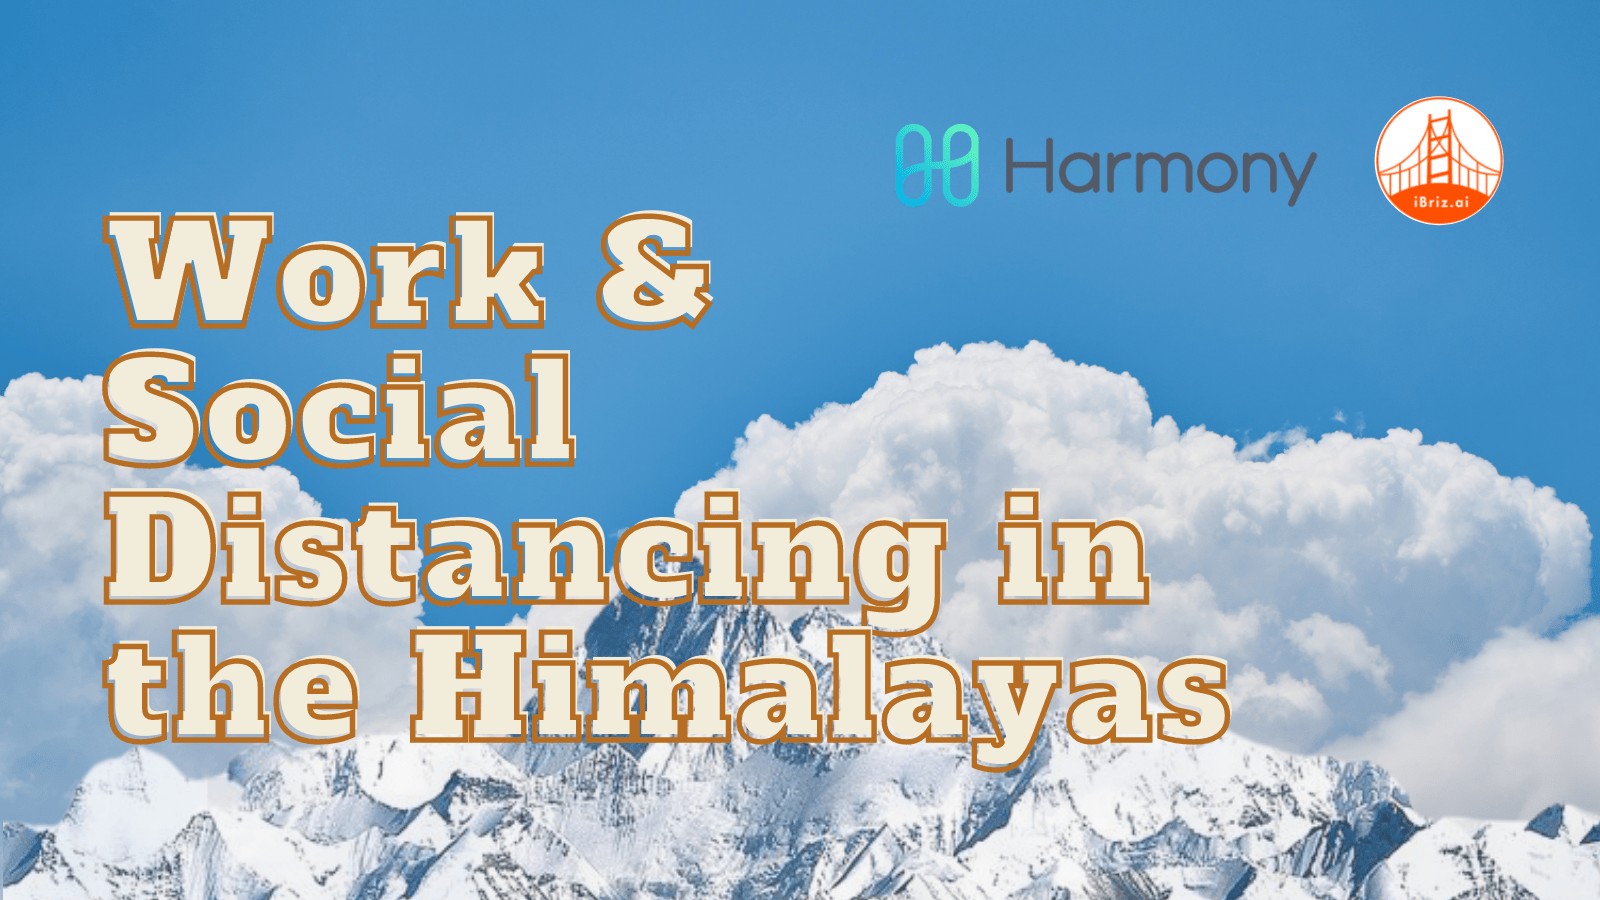 You are currently viewing Work & Social Distancing in the Himalayas : Update Nepal (Harmony Thank you for the nice T-shirts)